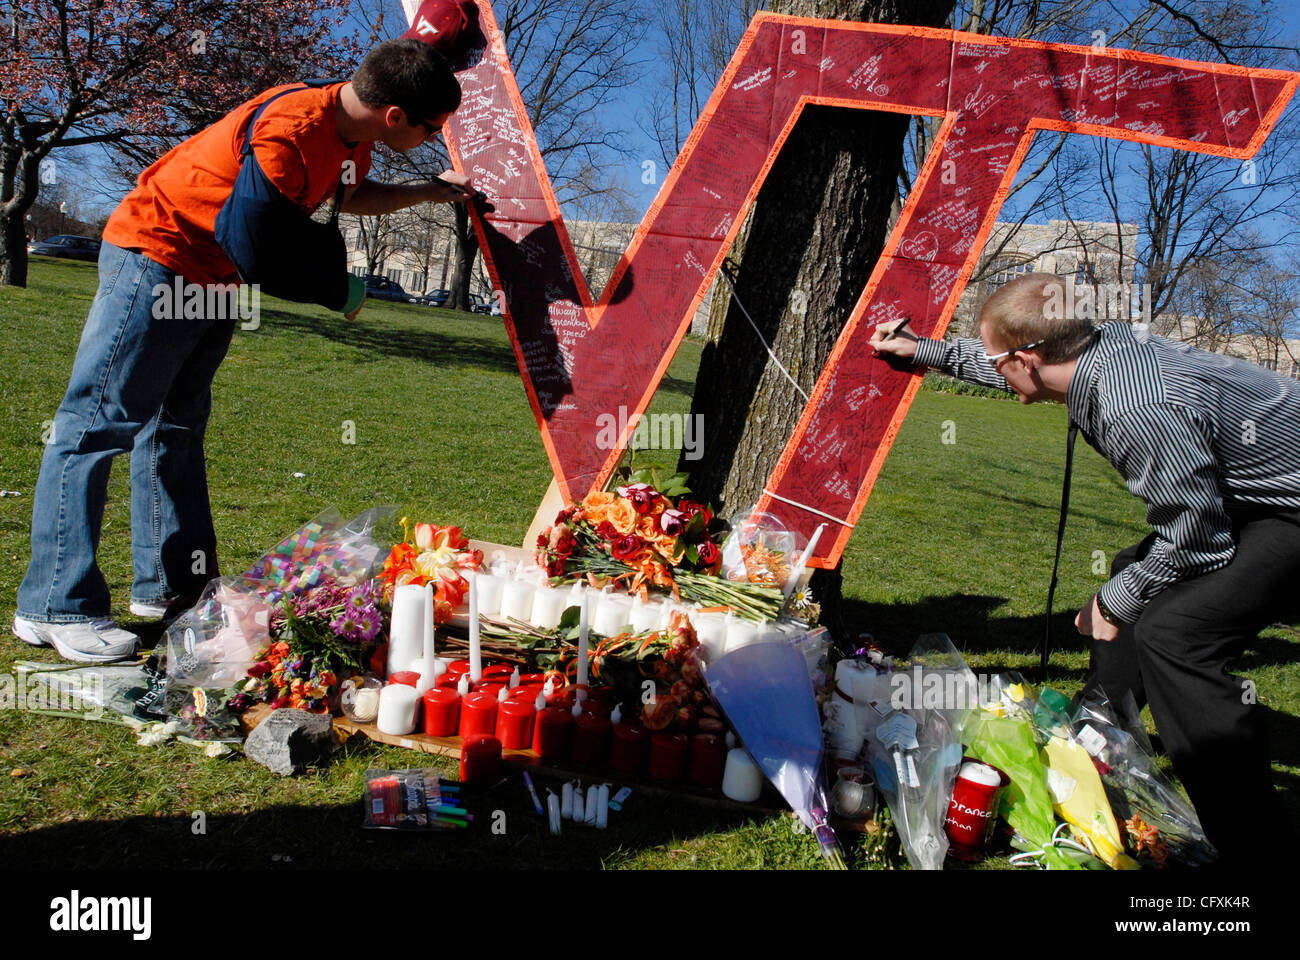 Apr 17, 2007 - Blacksburg, VA , USA - 24 hours after South Korean CHO SEUNG-HUI, a 23-year-old Virginia Tech Senior, English major gunned down 32 and then took his own life in the Virginia Tech massacre. The deadliest mass shooting in U.S. history and one of the worst ever. Cho in the USA since 1992 Stock Photo